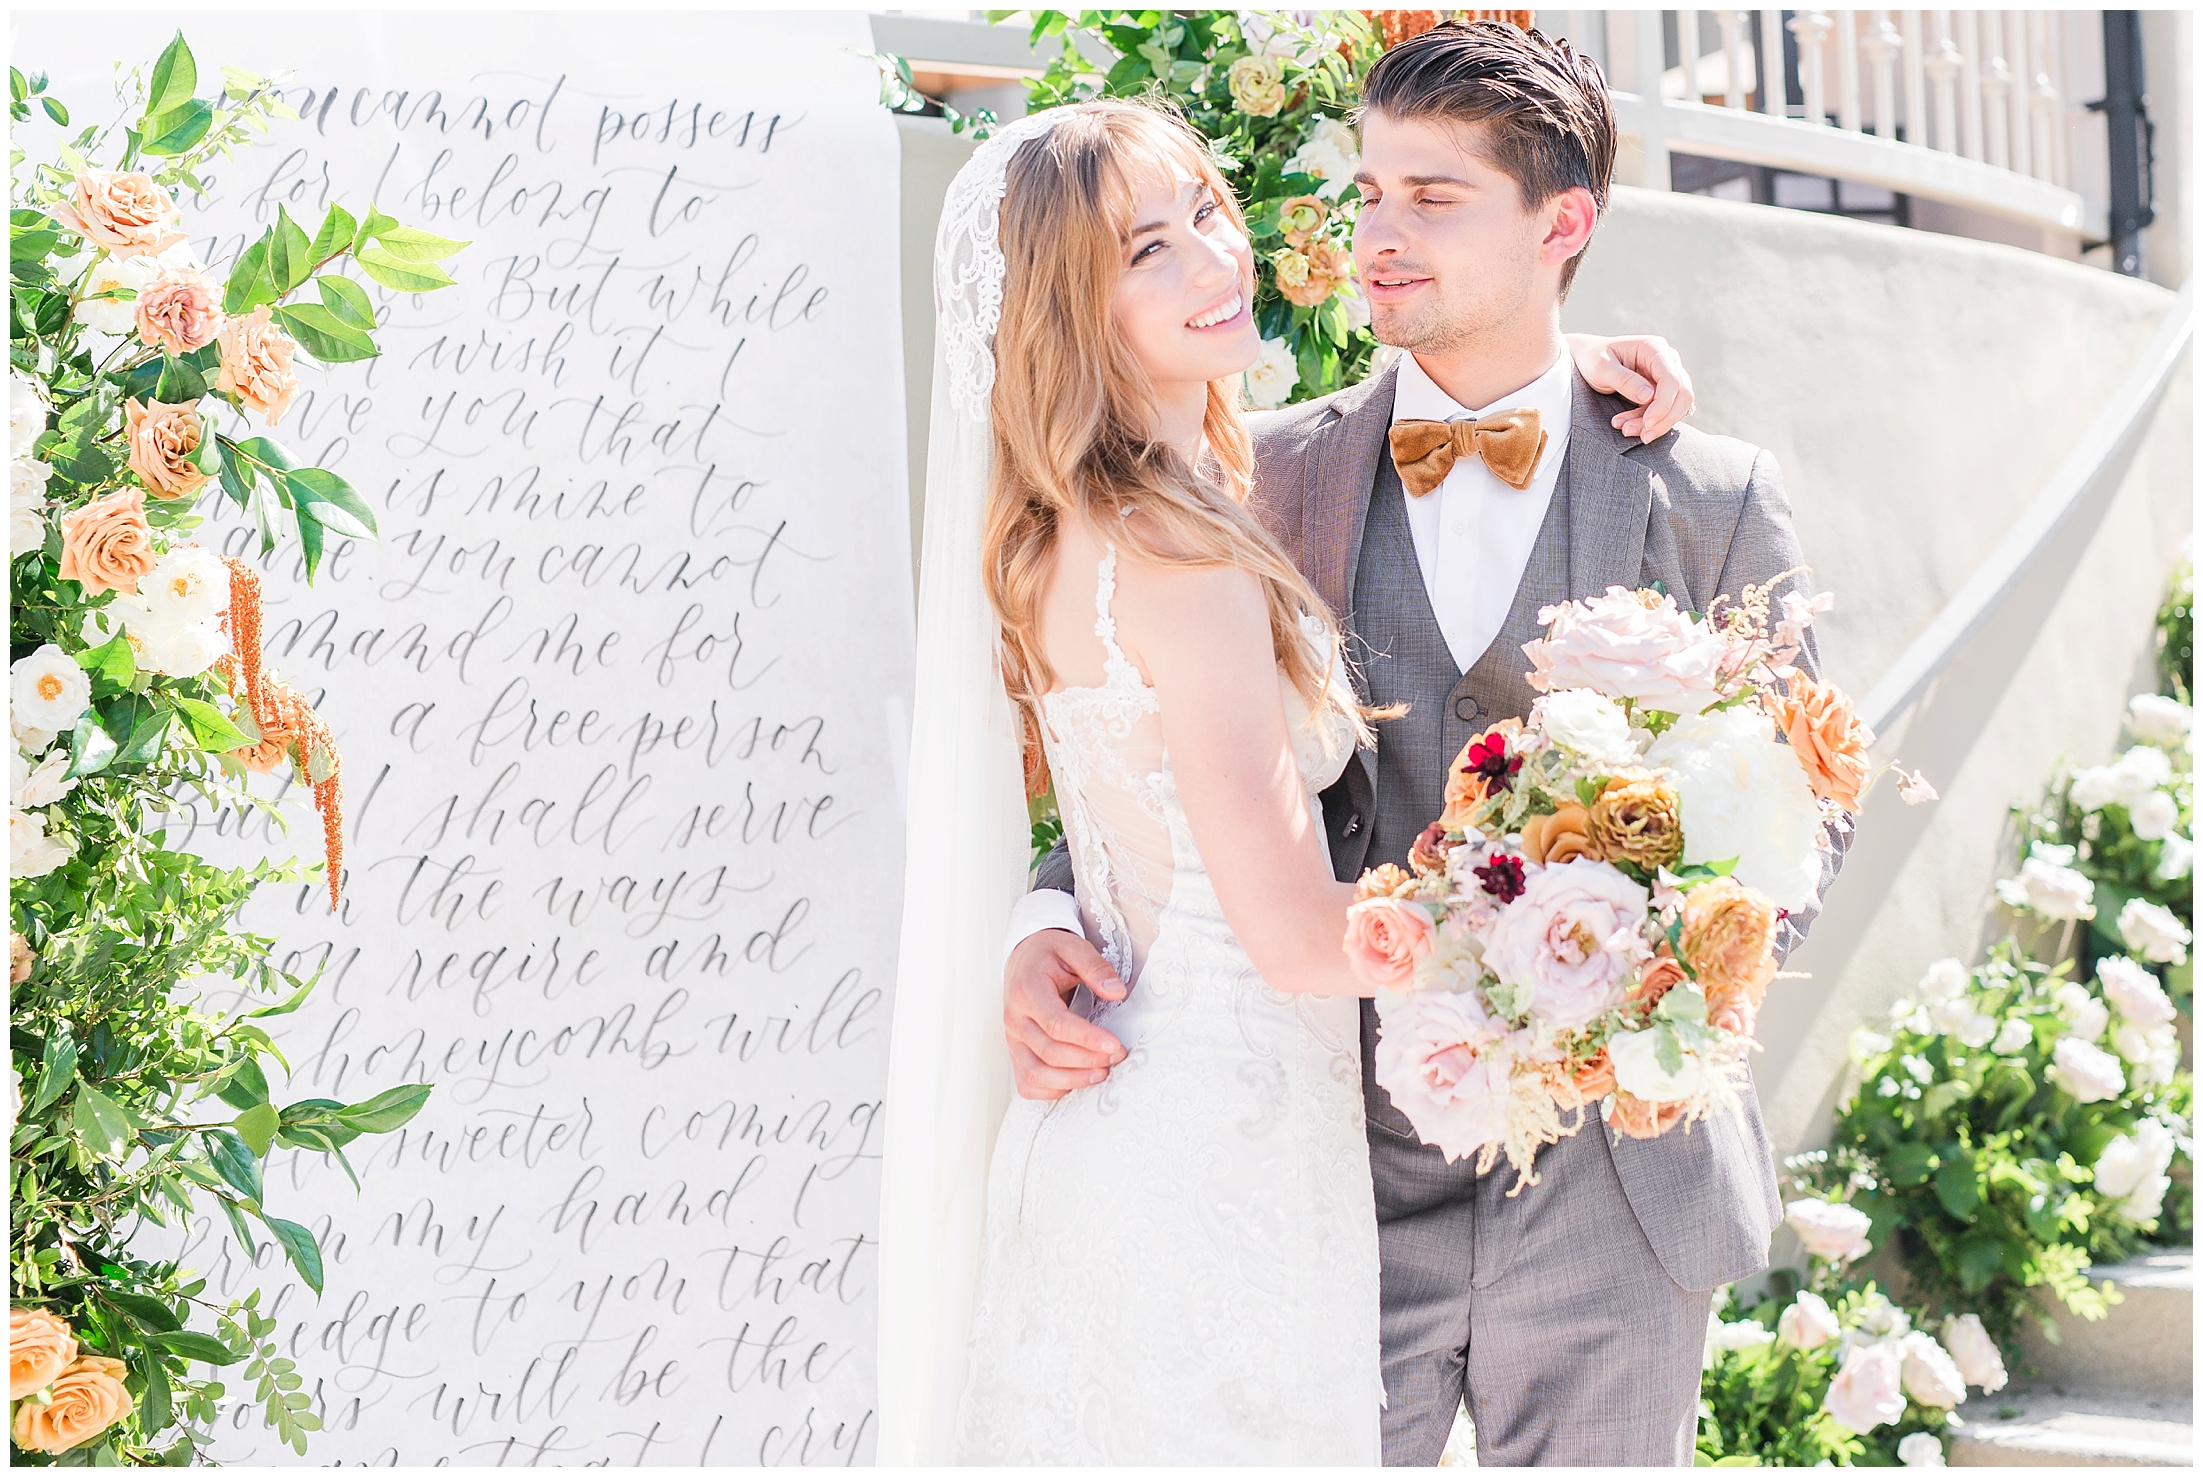 Light and Airy Wedding at Marbella Country Club In Orange County, California